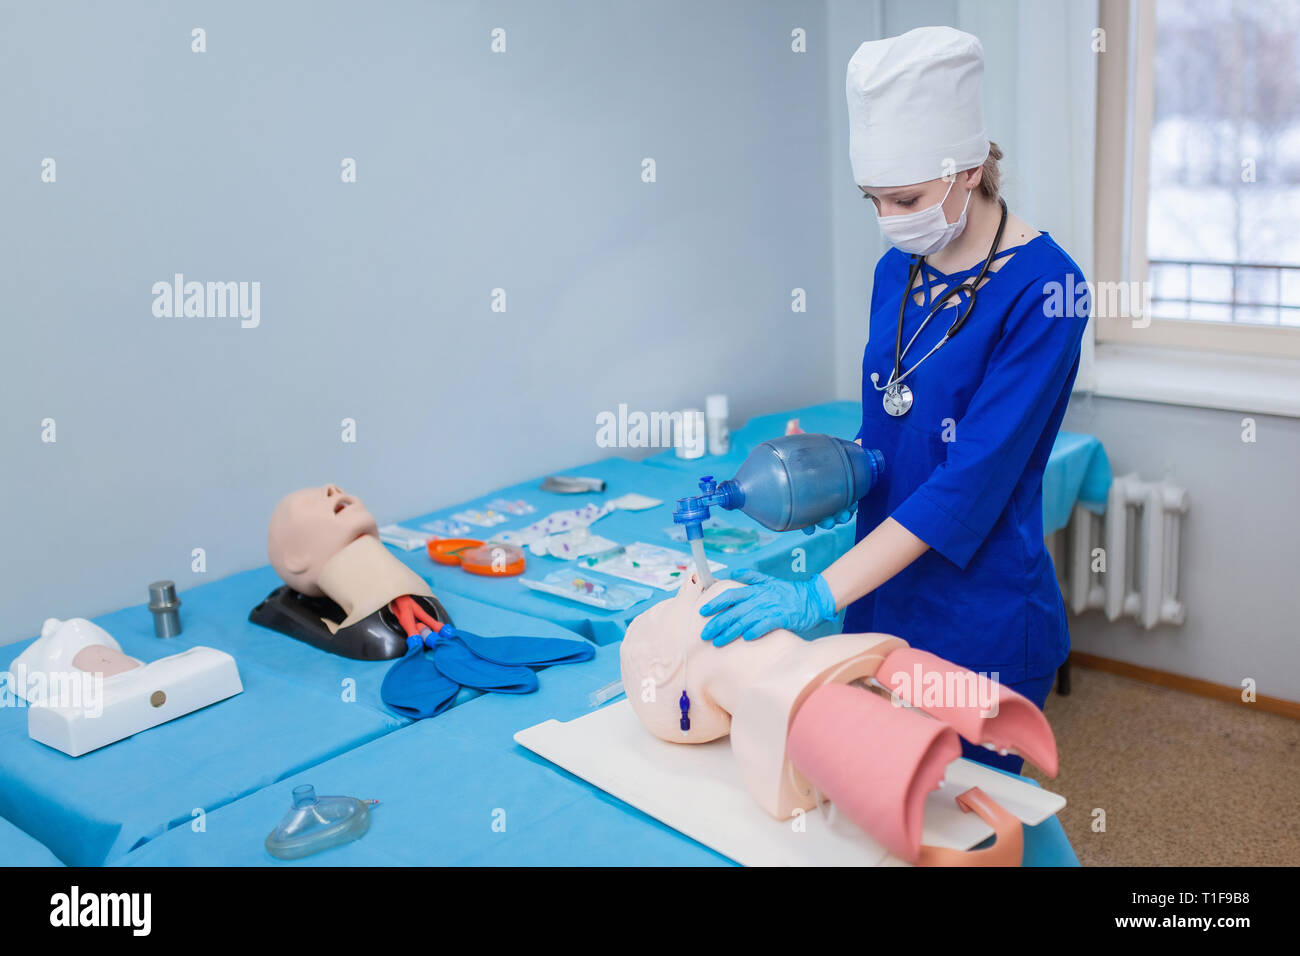 Artificial ventilation. introduction endotracheal tube (ETT) into trachea to ensure airway patency. doctor saves a life Stock Photo